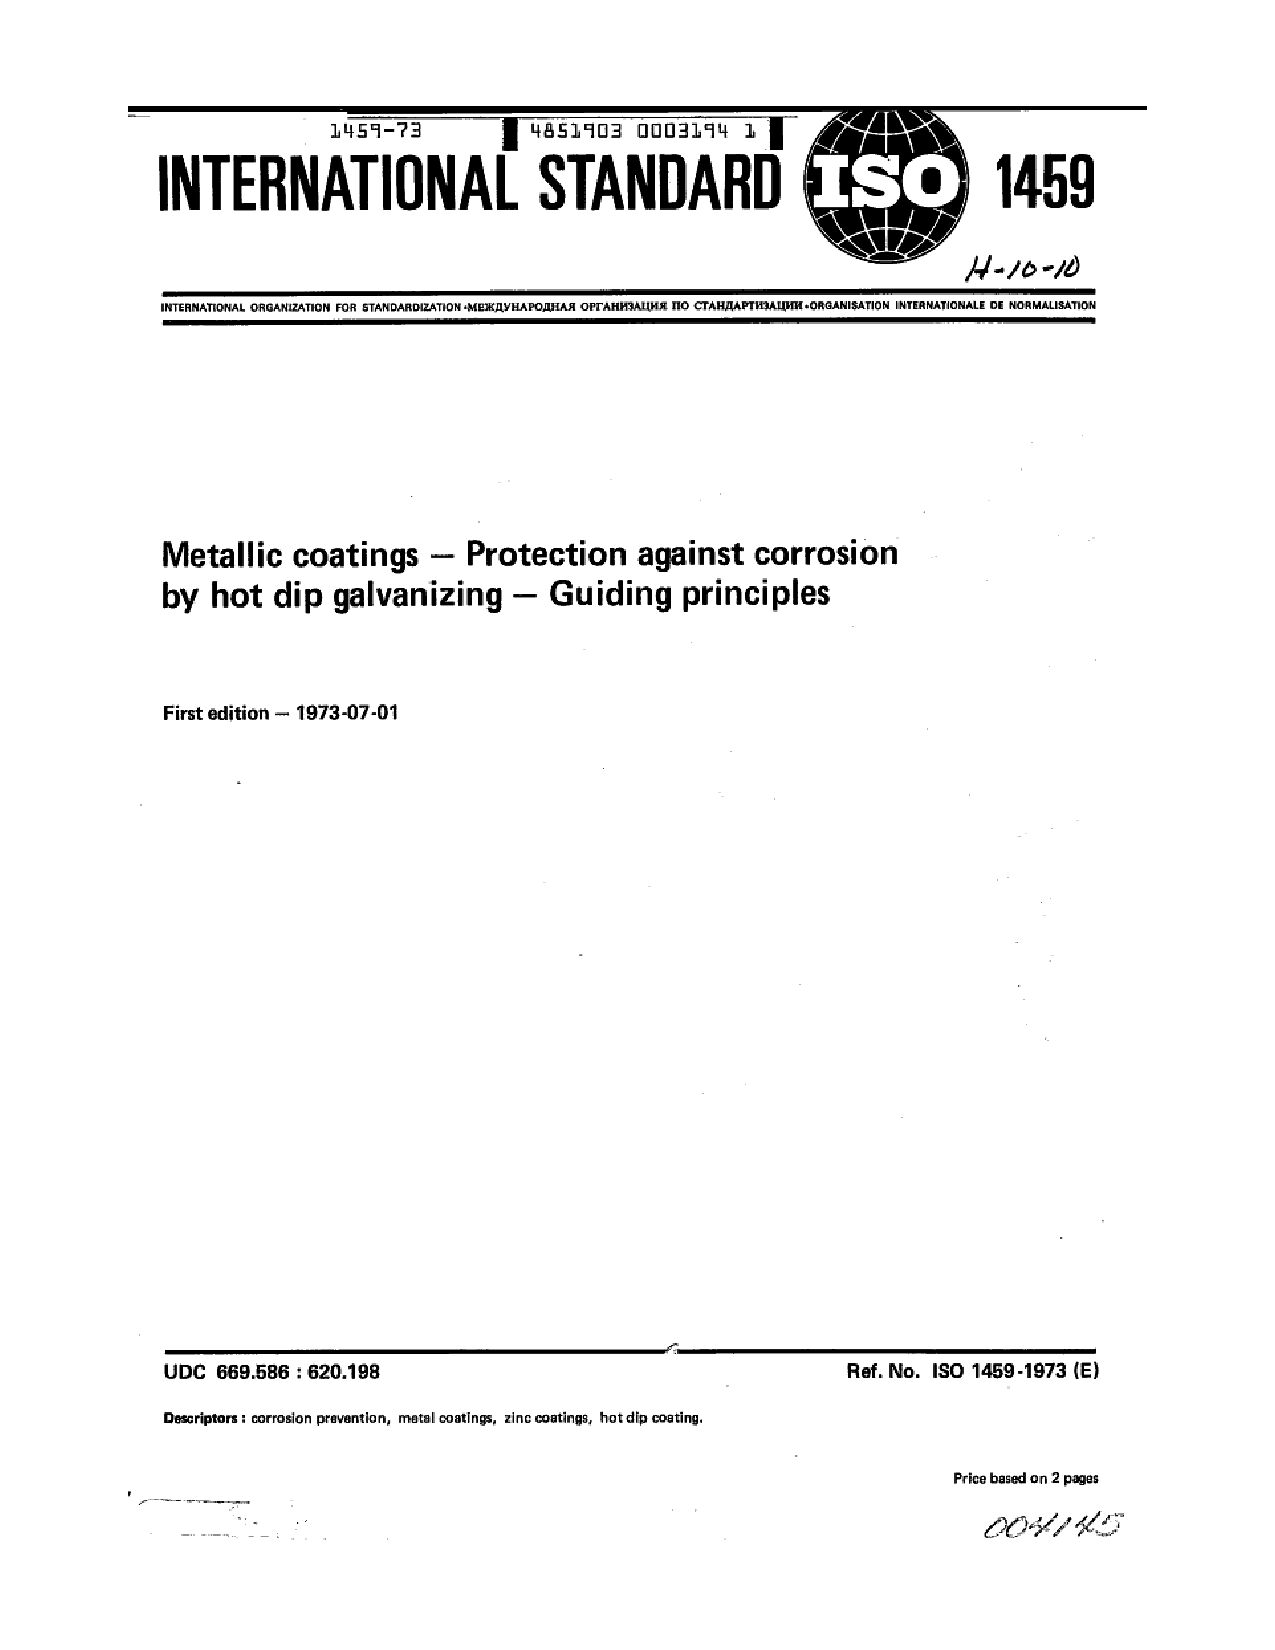 ISO 1459-1973